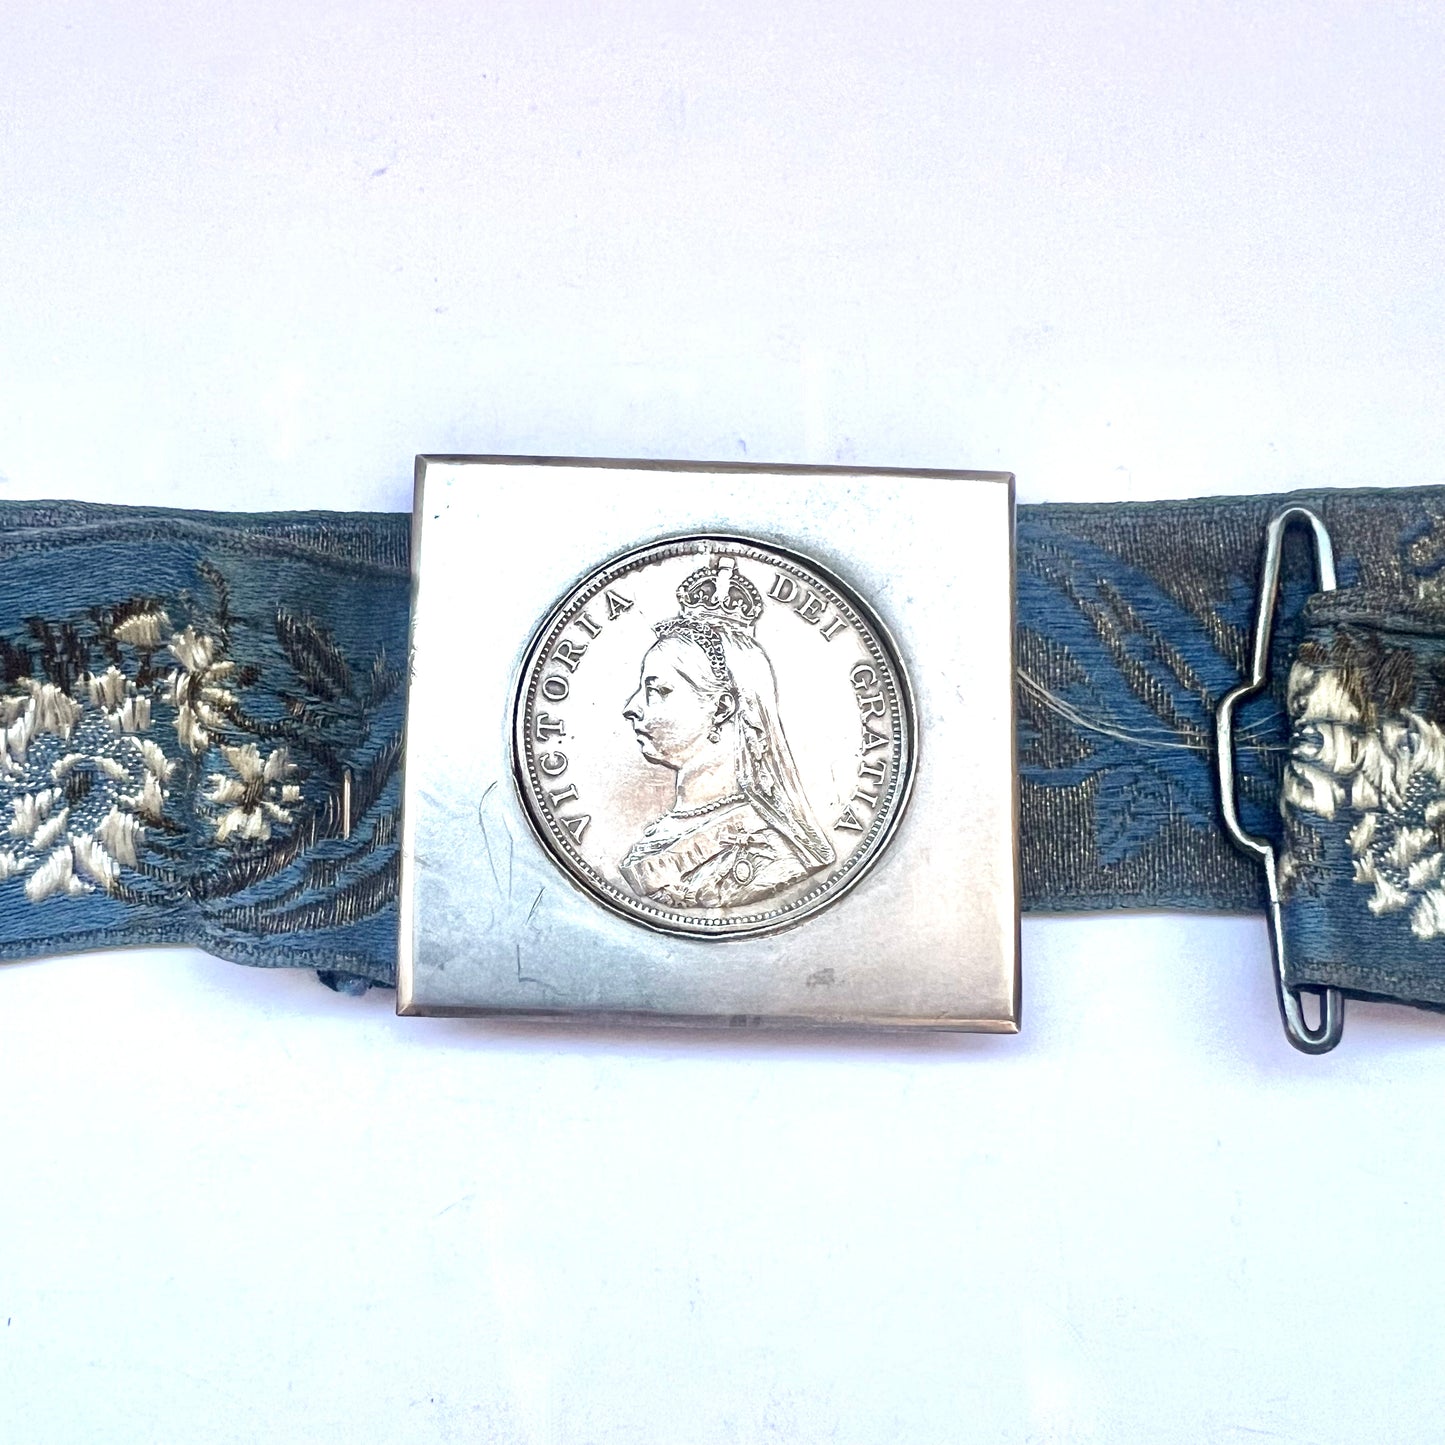 Antique Colonial Australian embroidered belt with sterling silver buckle featuring 1887 double florin